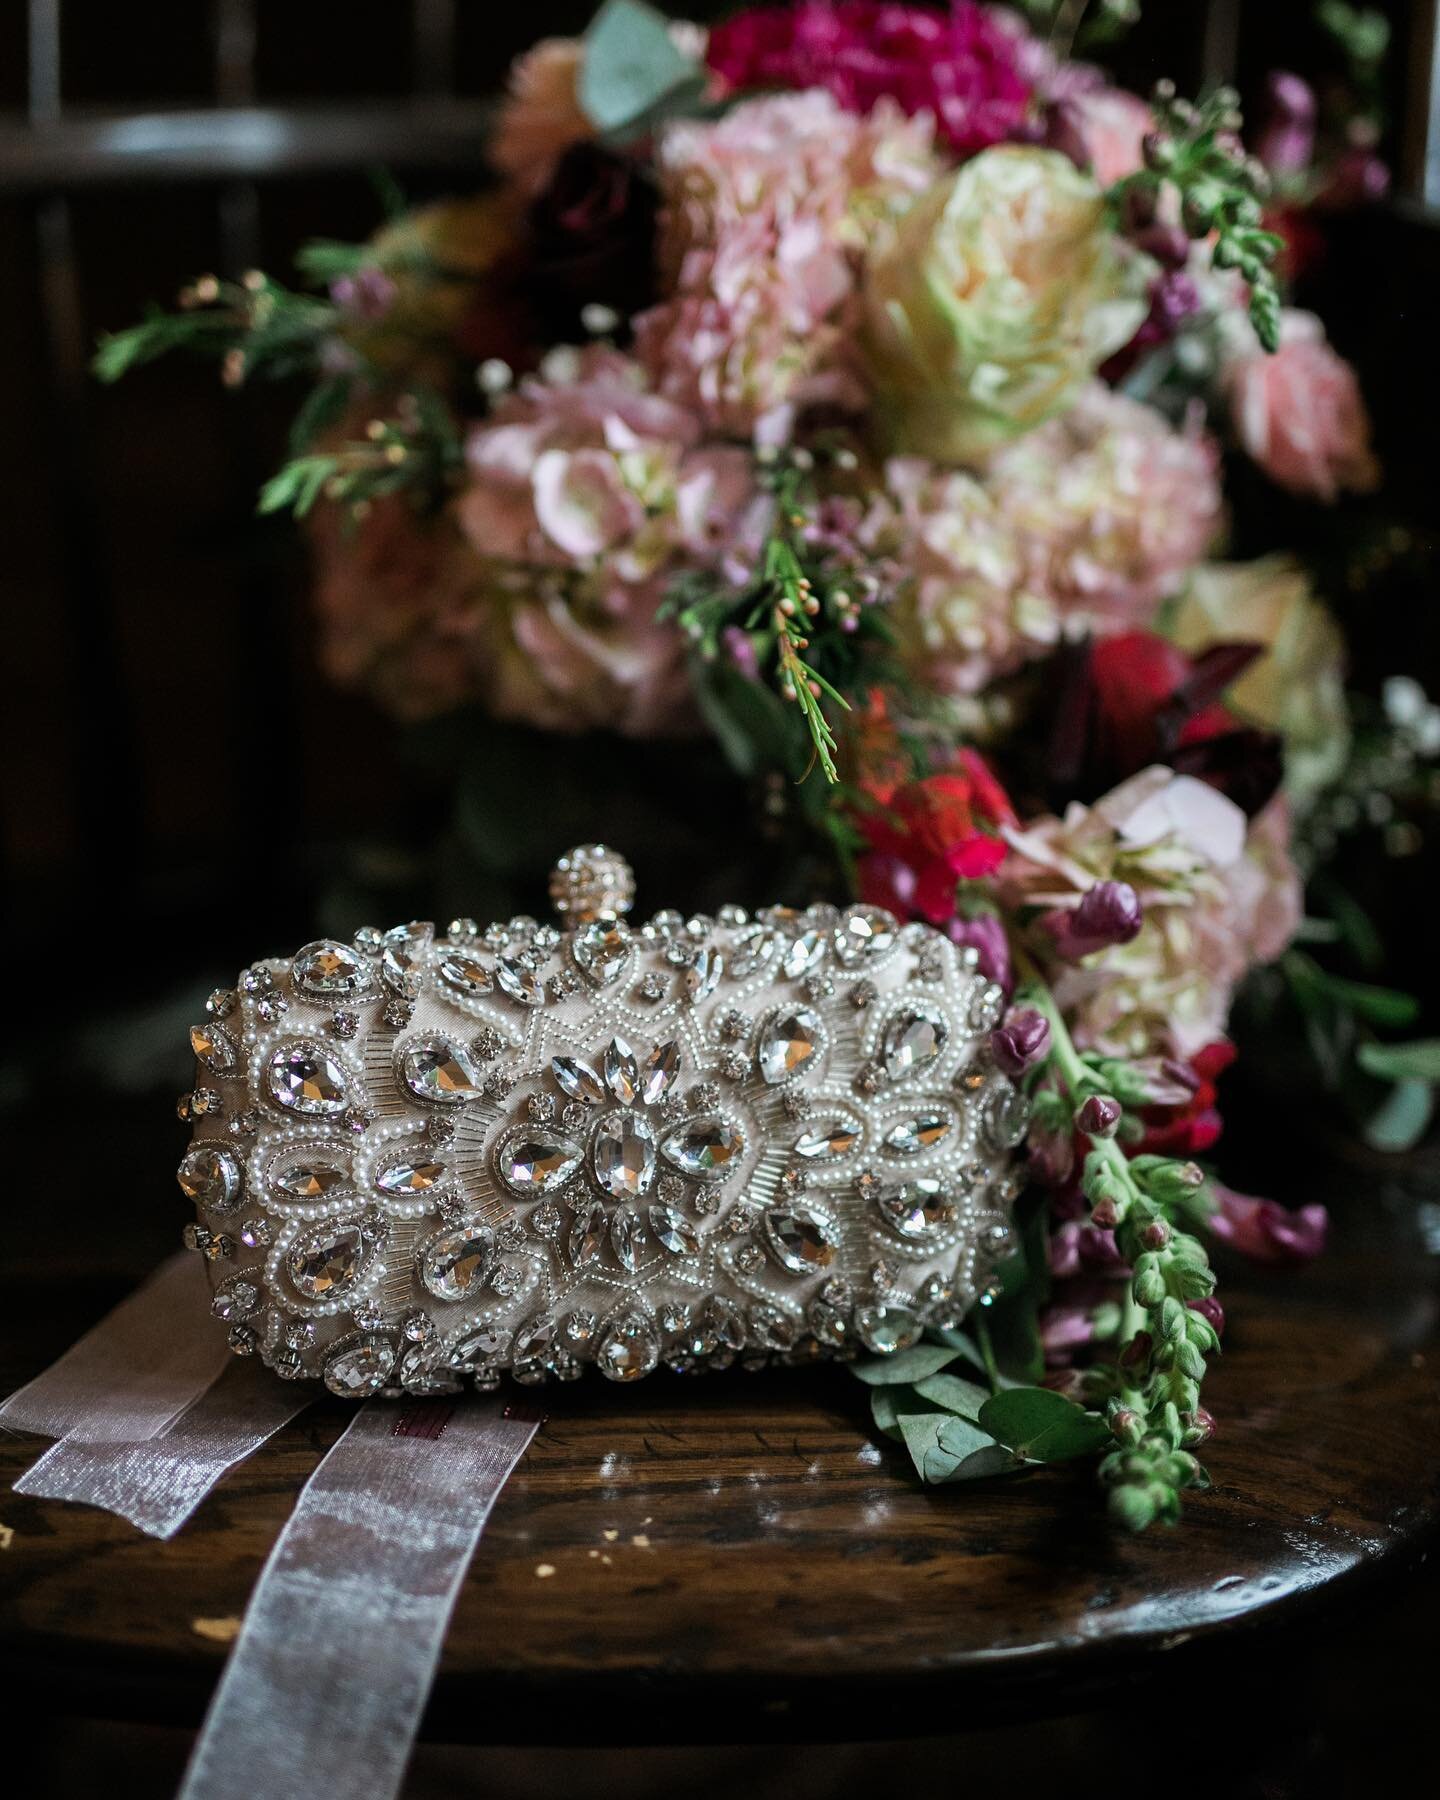 The perfect glam wedding day clutch!

#jendederichphotography #wisconsinbride #wisconsinweddingphotographer #wisxonsinwedding #madisonweddingphotographer #milwaukeeweddingphotographer #greenbayweddingphotographer #doorcountyweddingphotographer